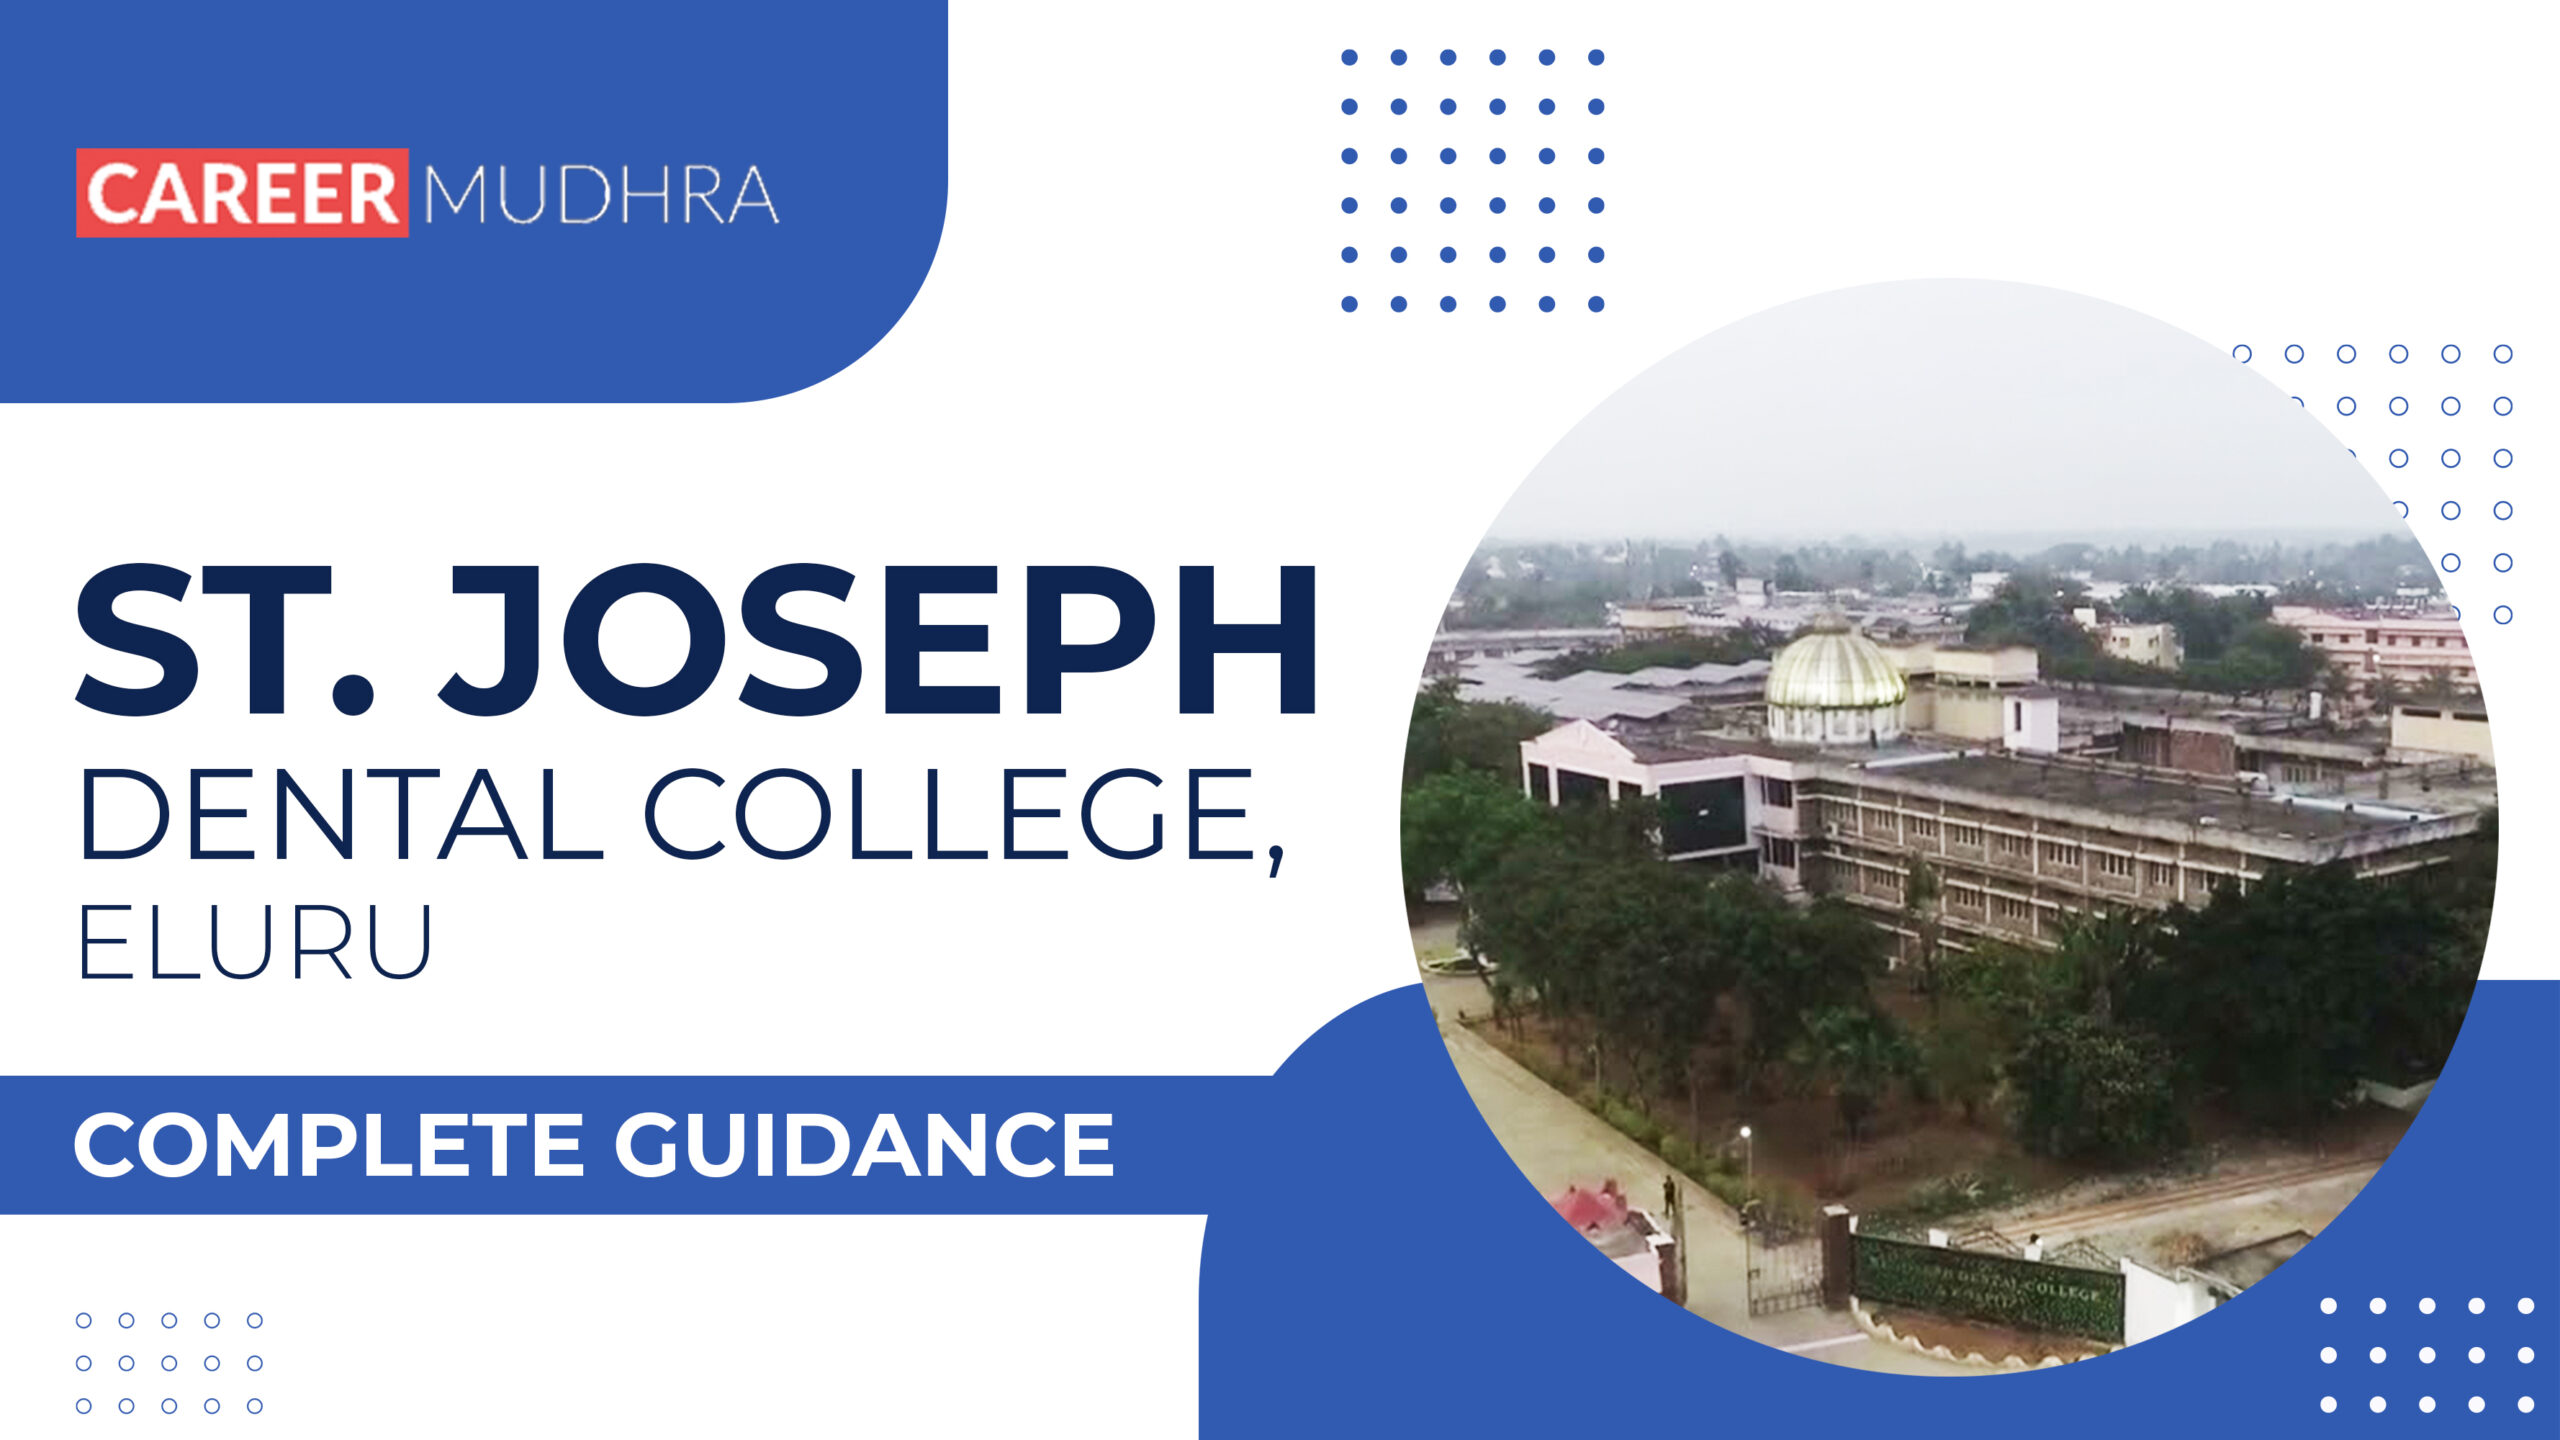 St. Joseph Dental College Eluru Admission, Fee Structure, Courses Offered, On Campus Facilities, Recognition